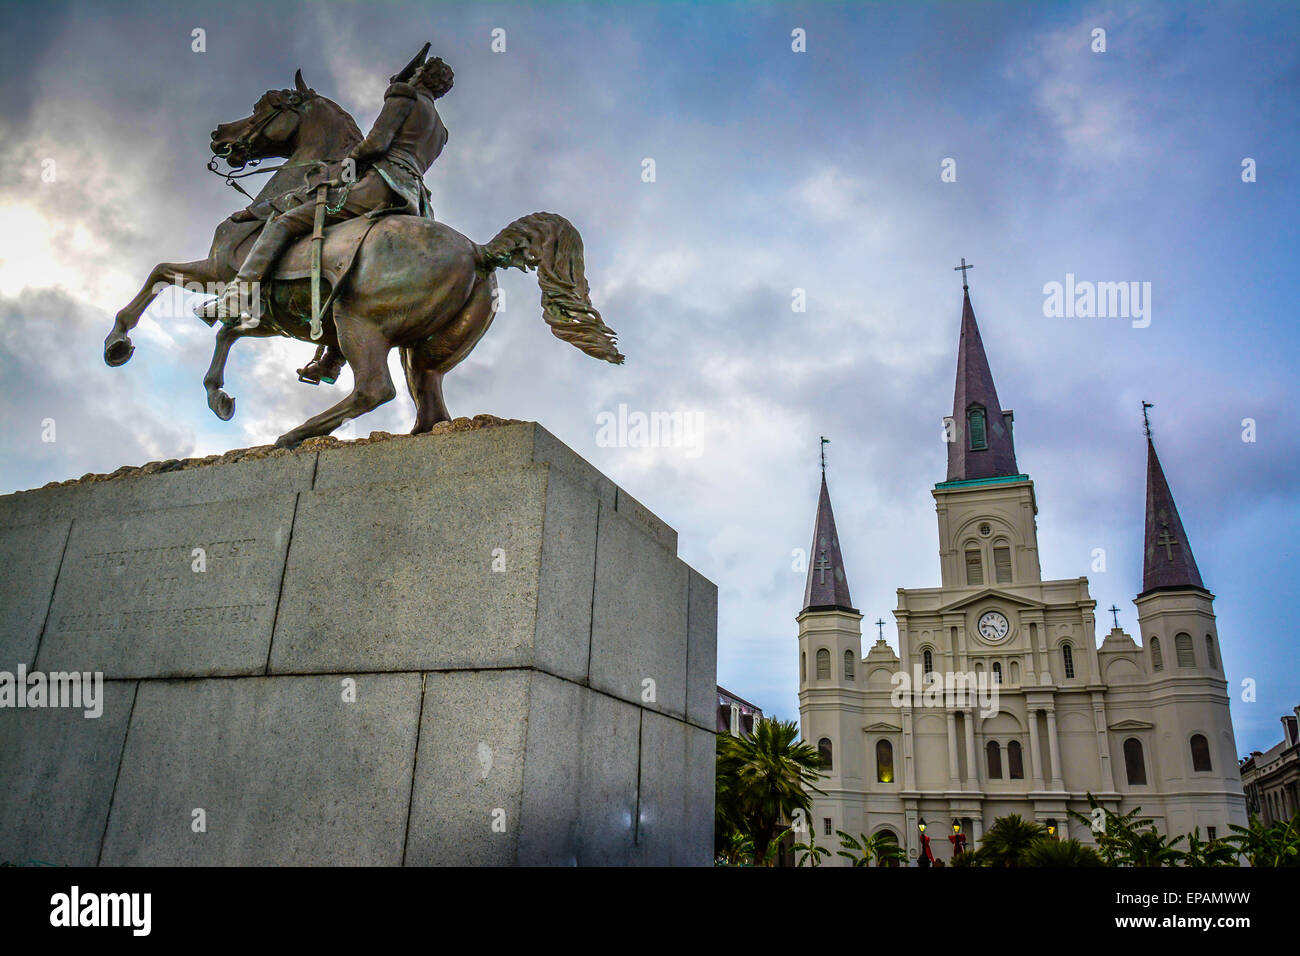 Early Morning Fog On Jackson Square Obscures St. Louis Cathedral In New  Orleans, Louisiana Stock Photo, Picture and Royalty Free Image. Image  14828391.